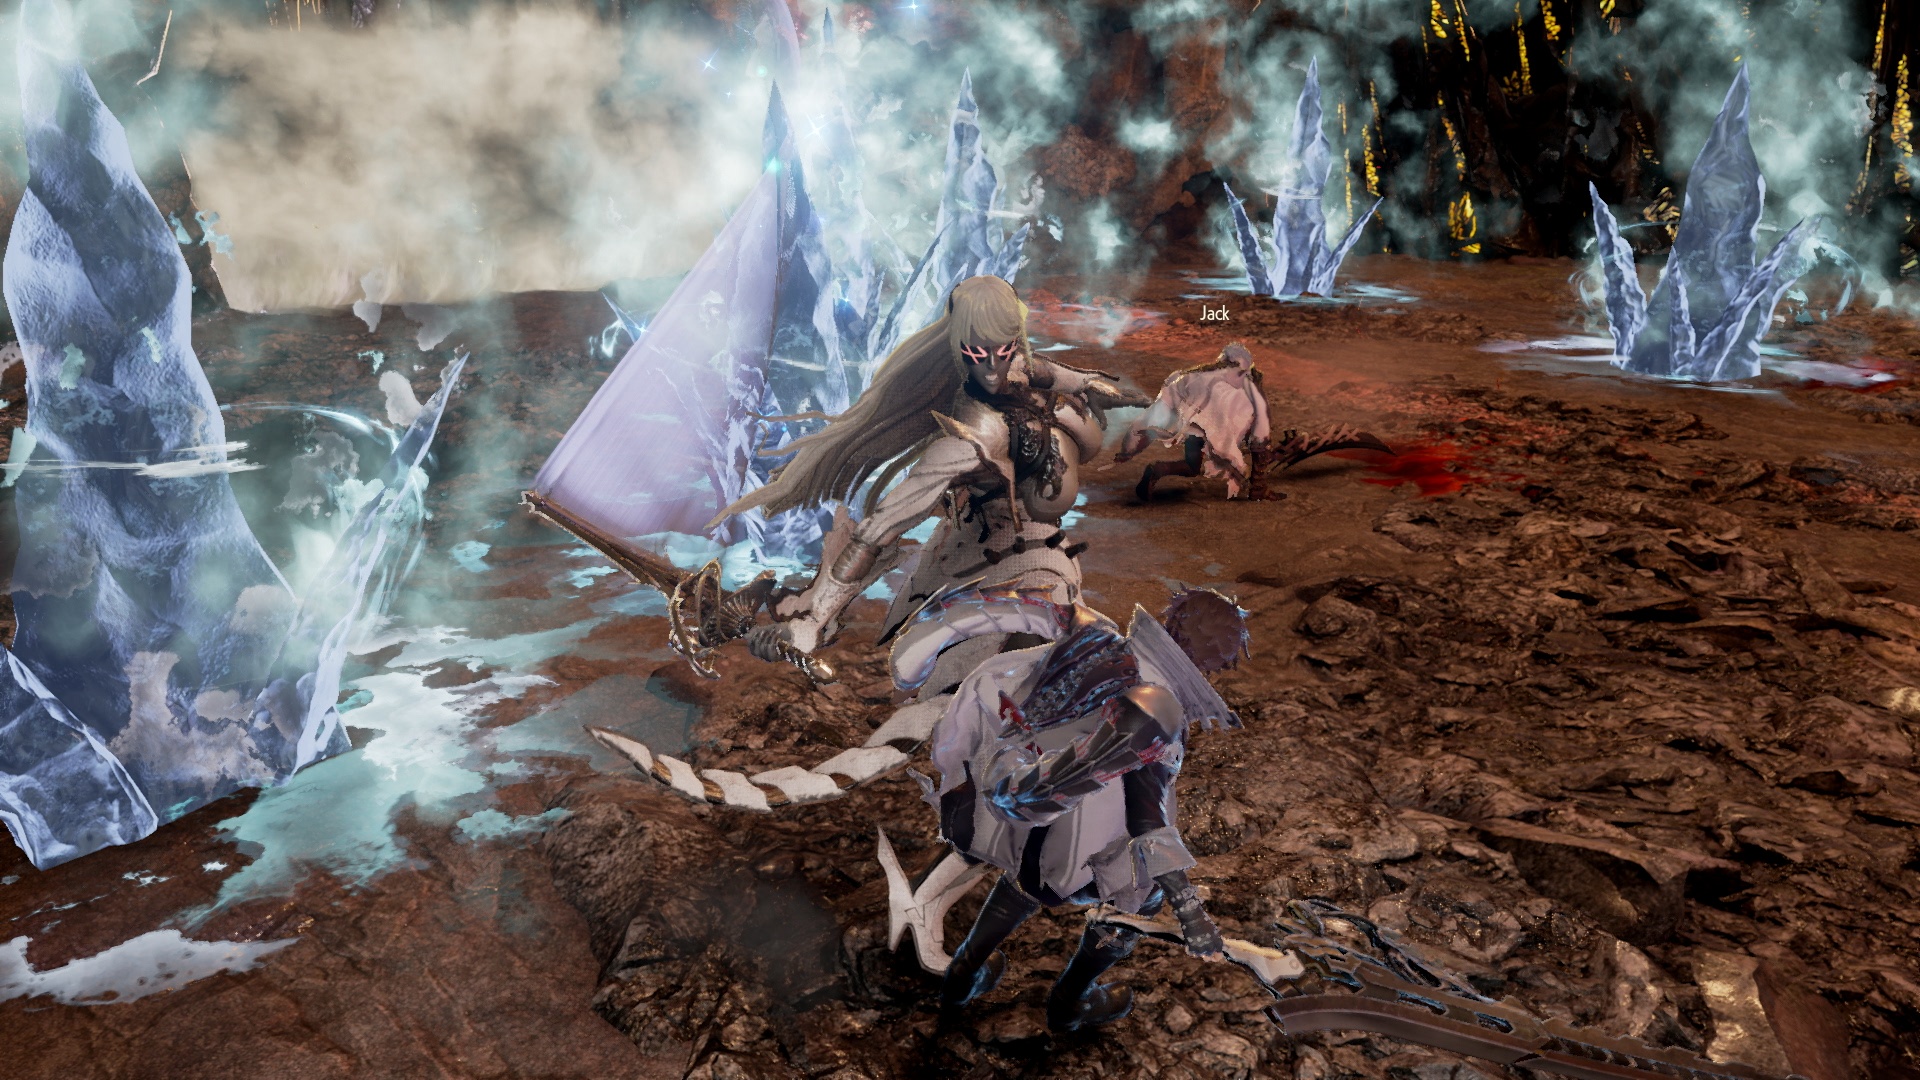 Prepare to Rise and Survive in Code Vein on Xbox One - Xbox Wire